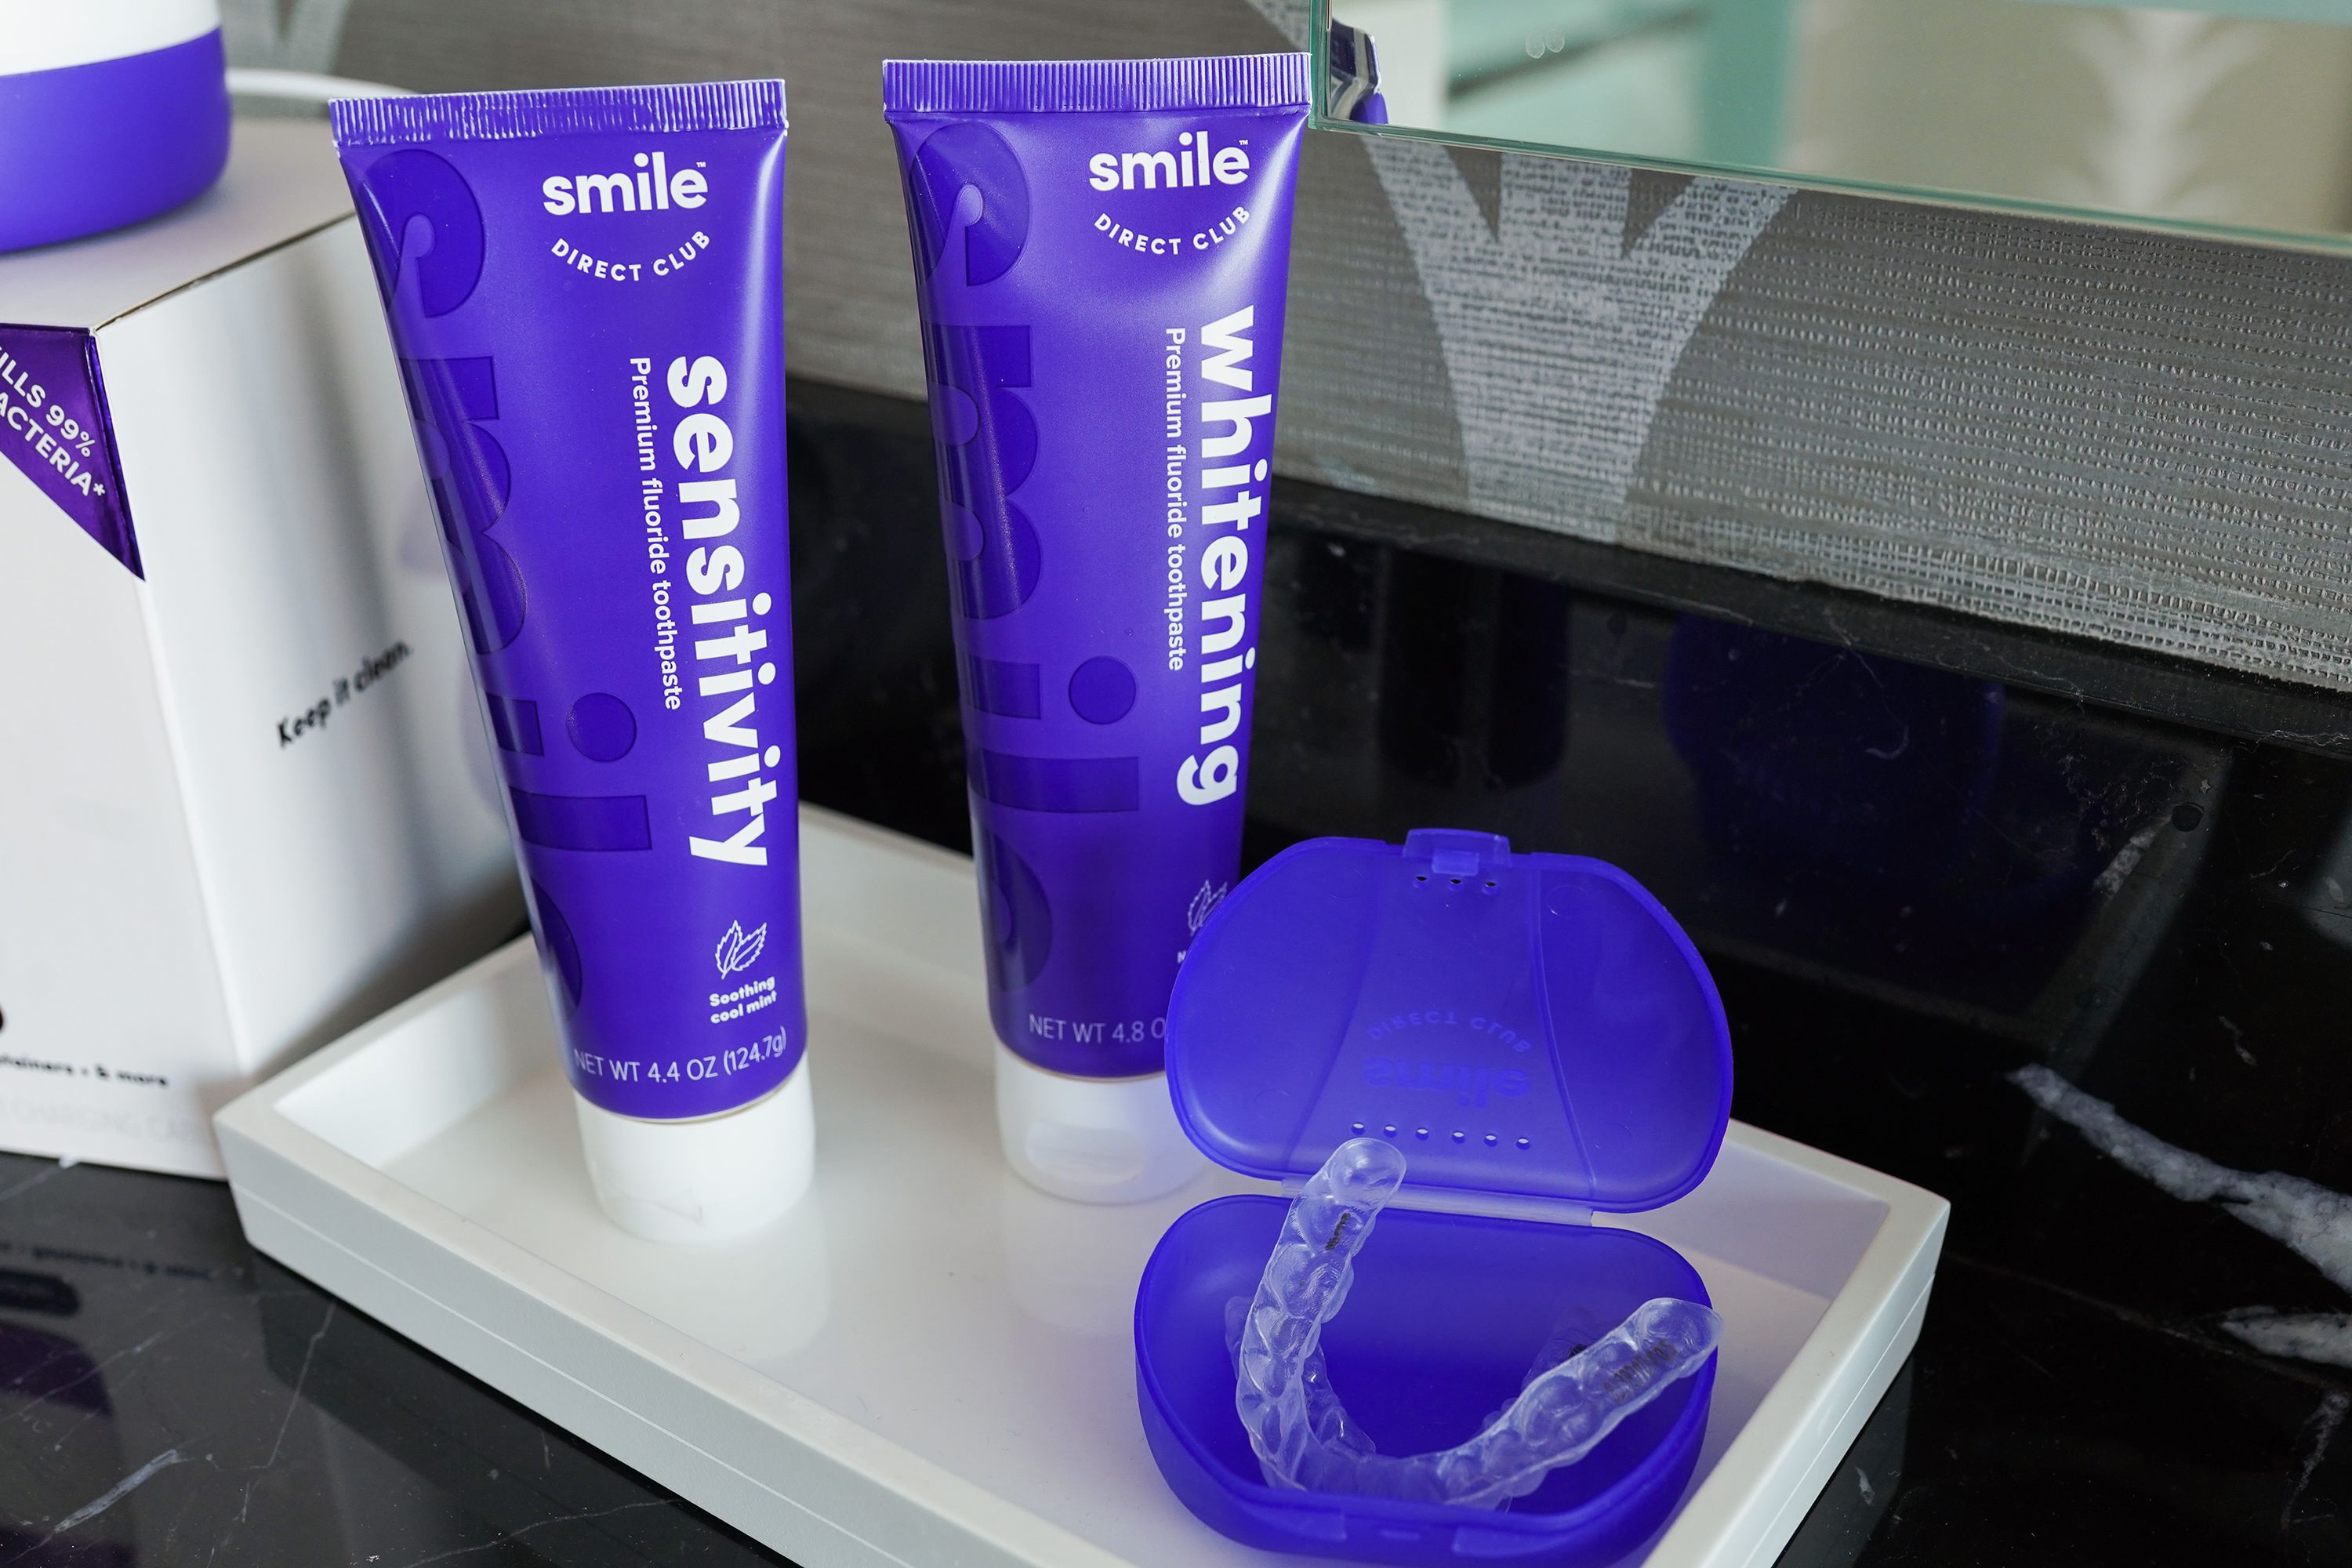 is shutting down its Smile charity platform - The Verge